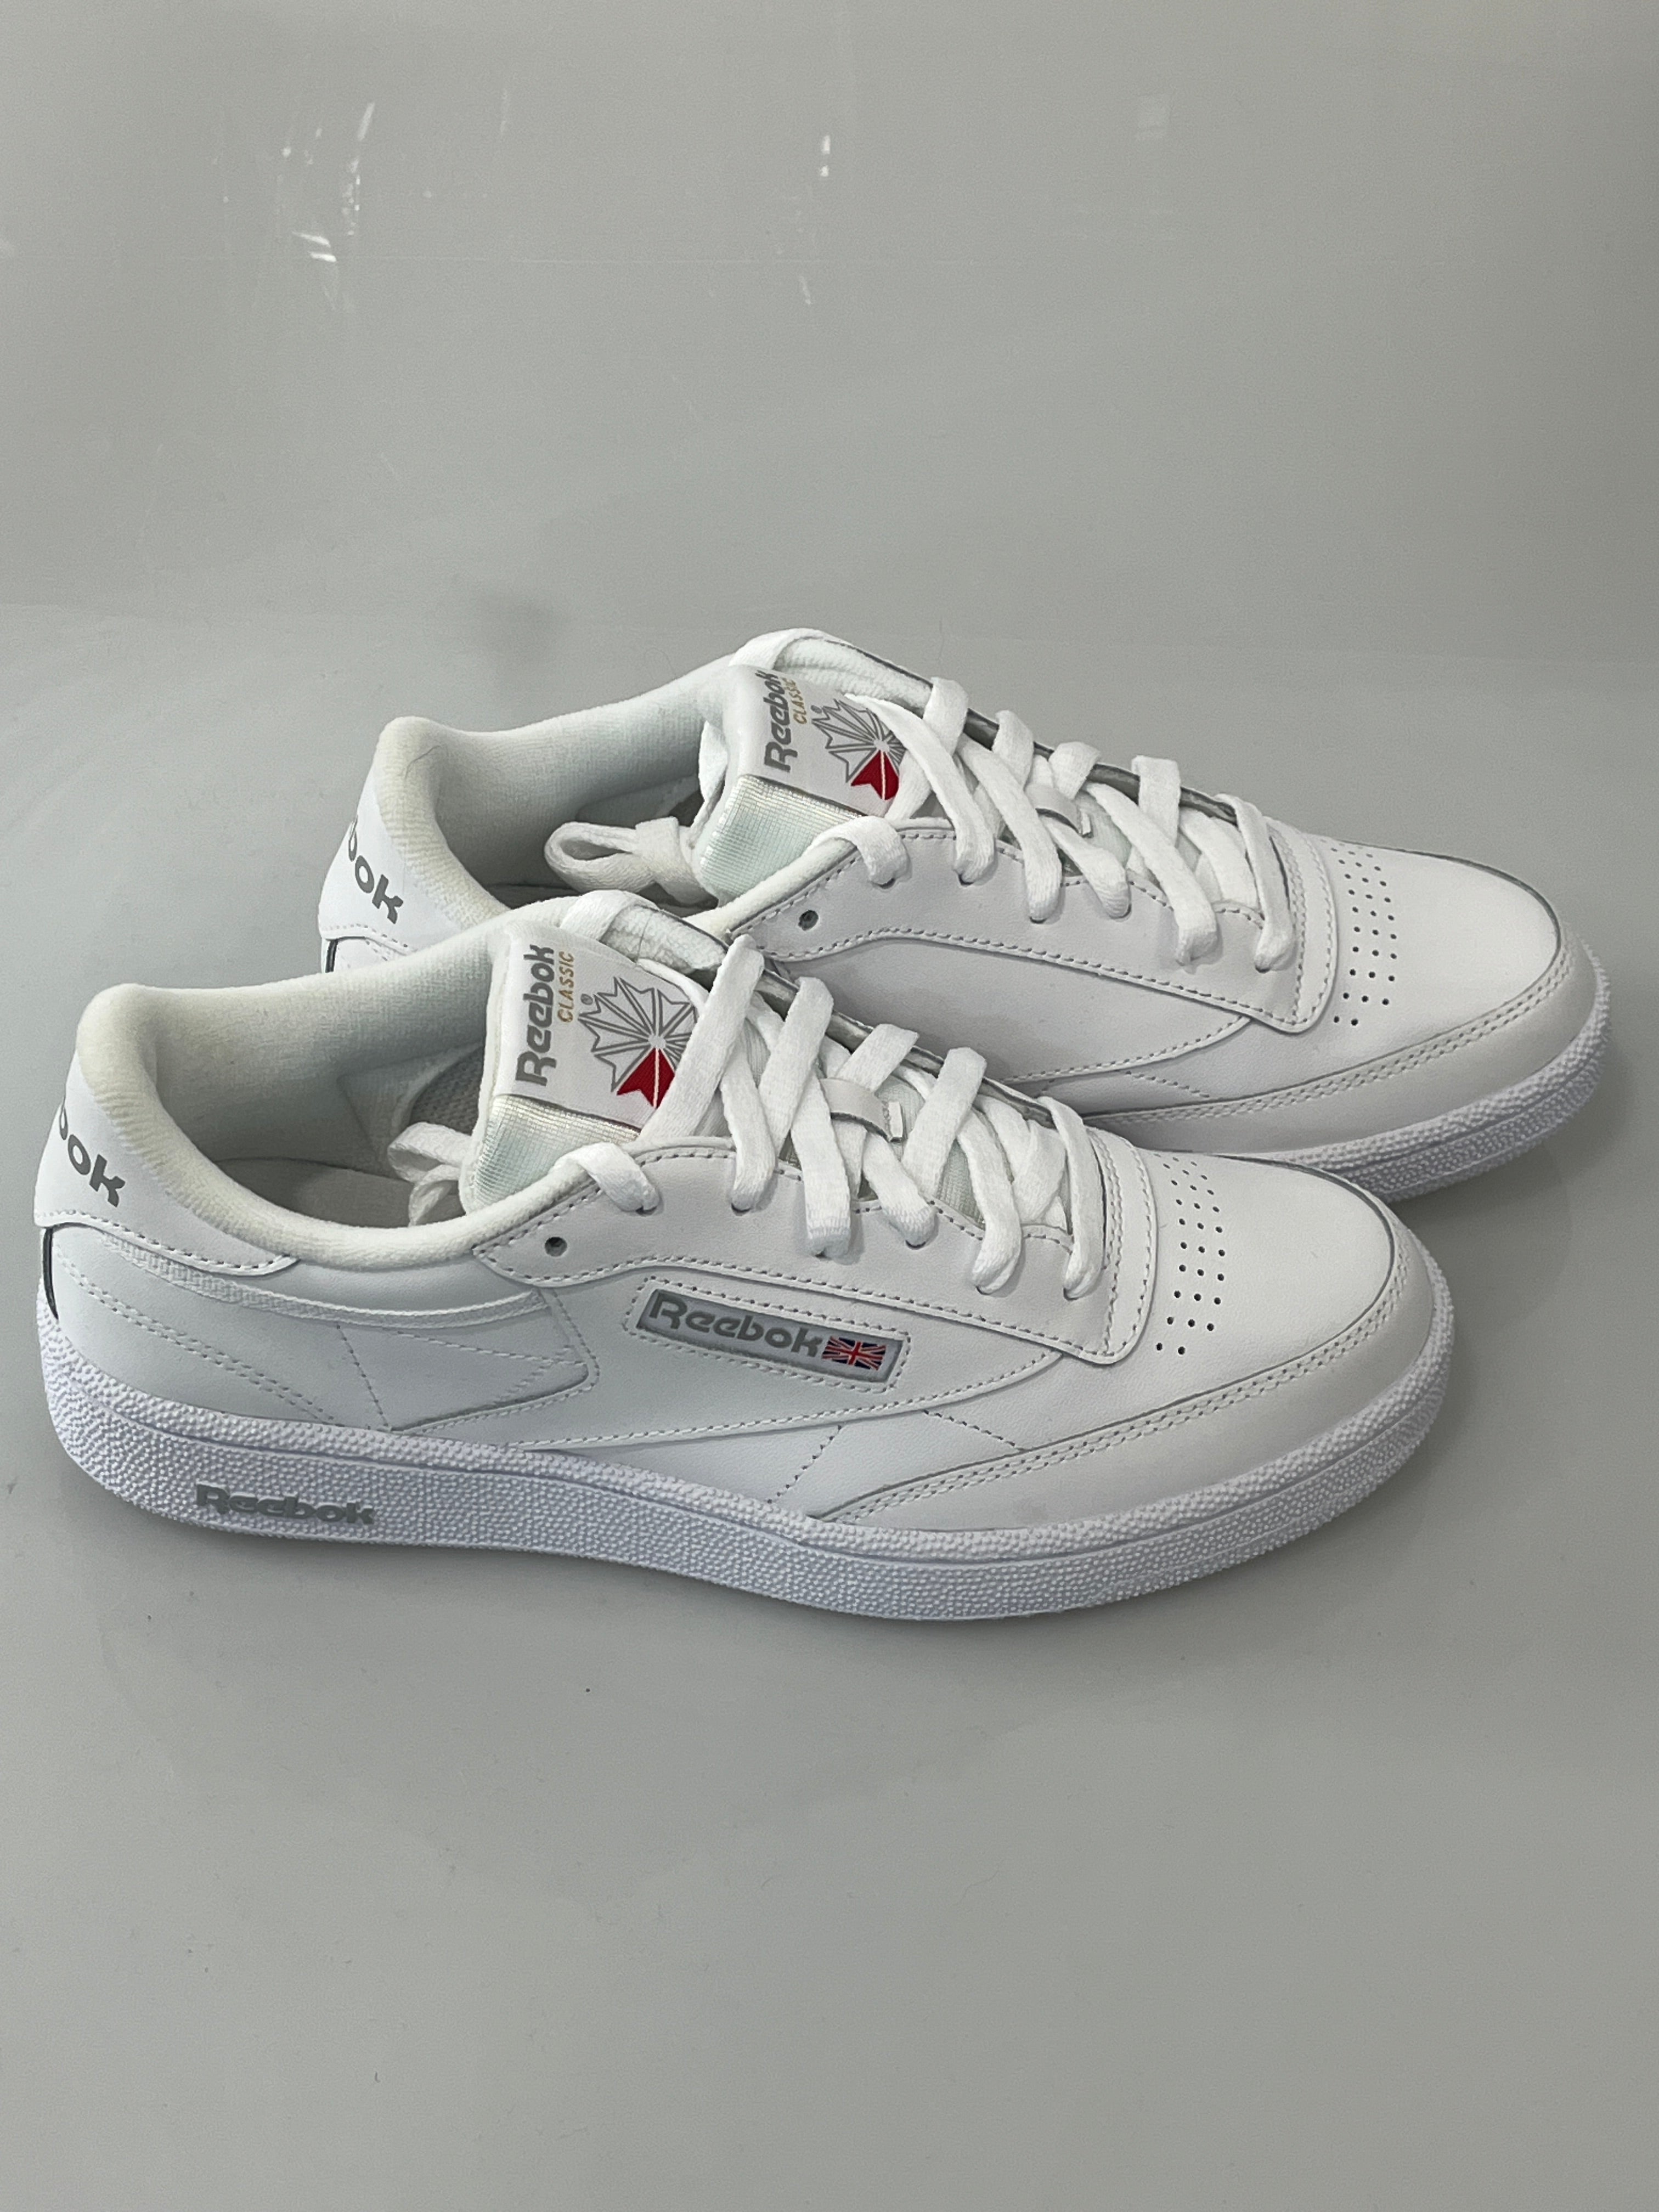 Reebok Club C 85 Shoes – The Locals Sale